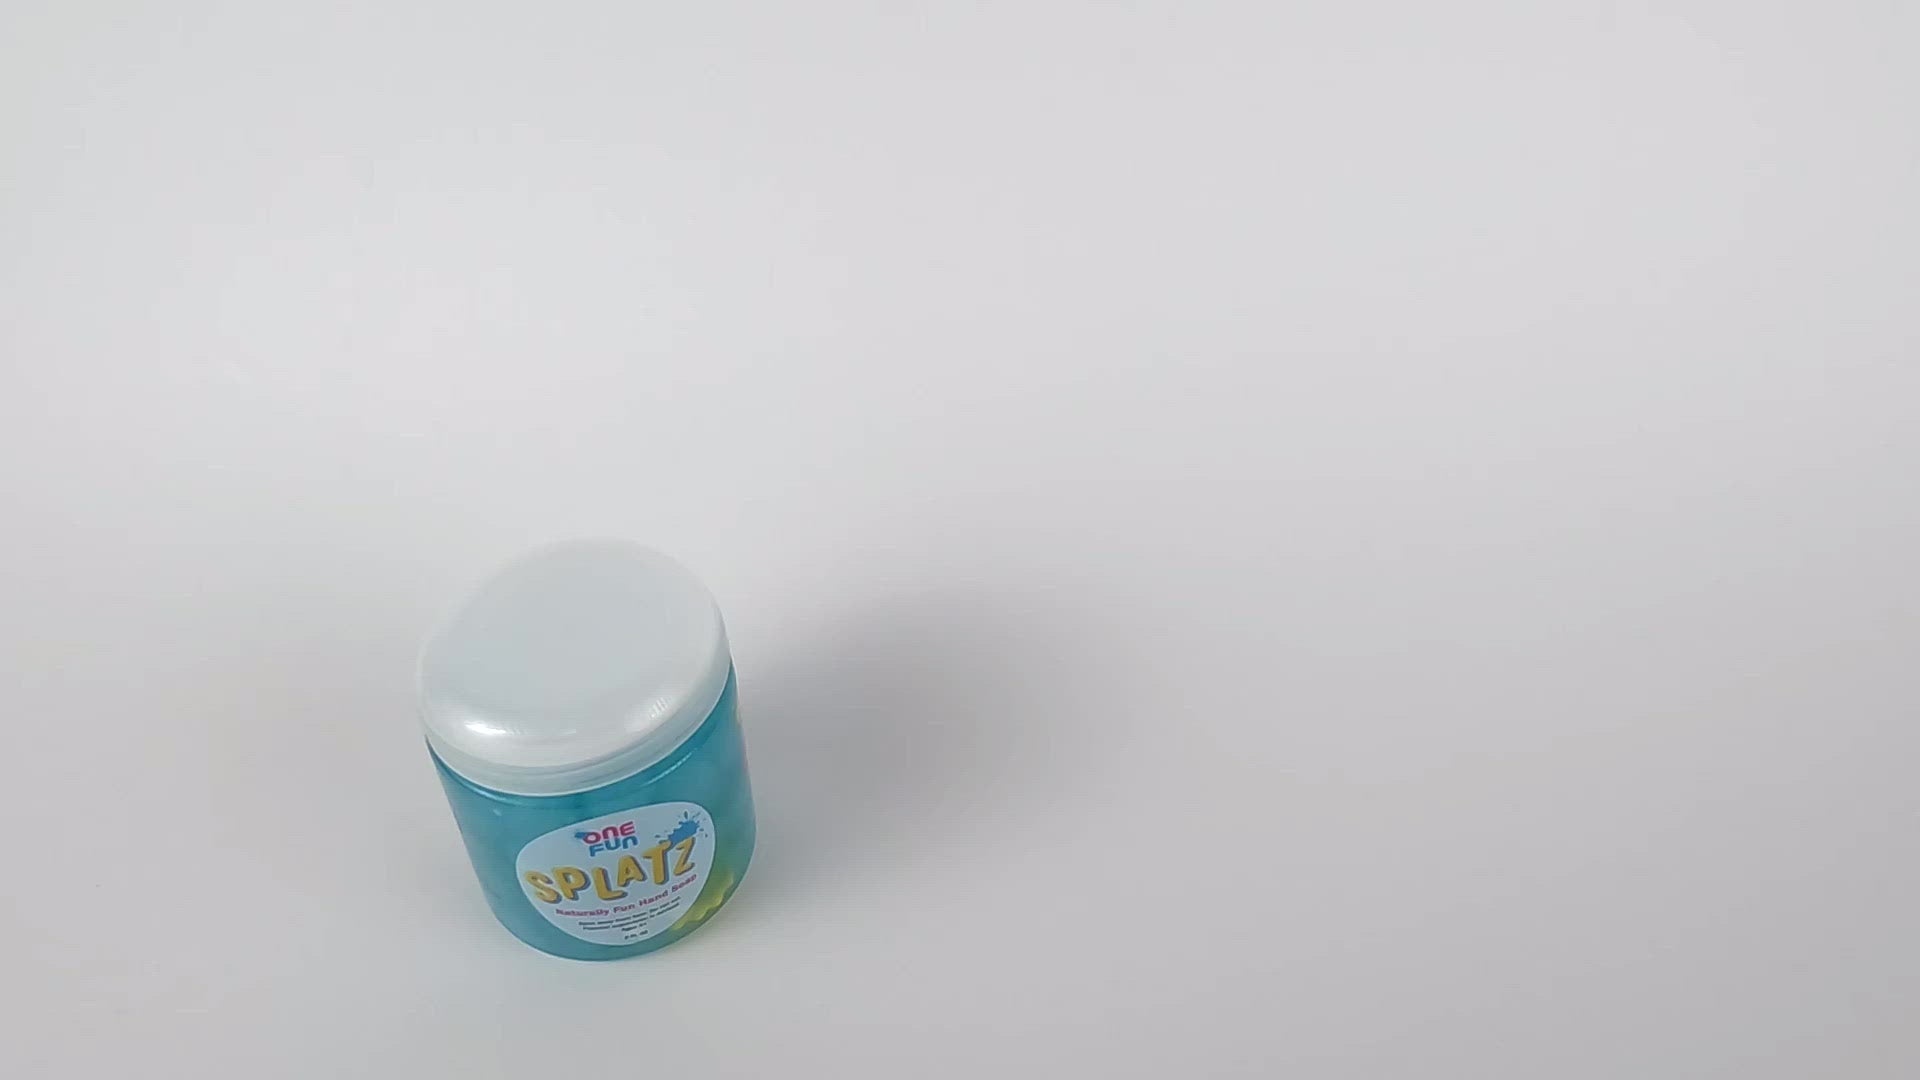 Watch this video on how to use SPLATZ Naturally Fun Hand Soap and blow bubbles